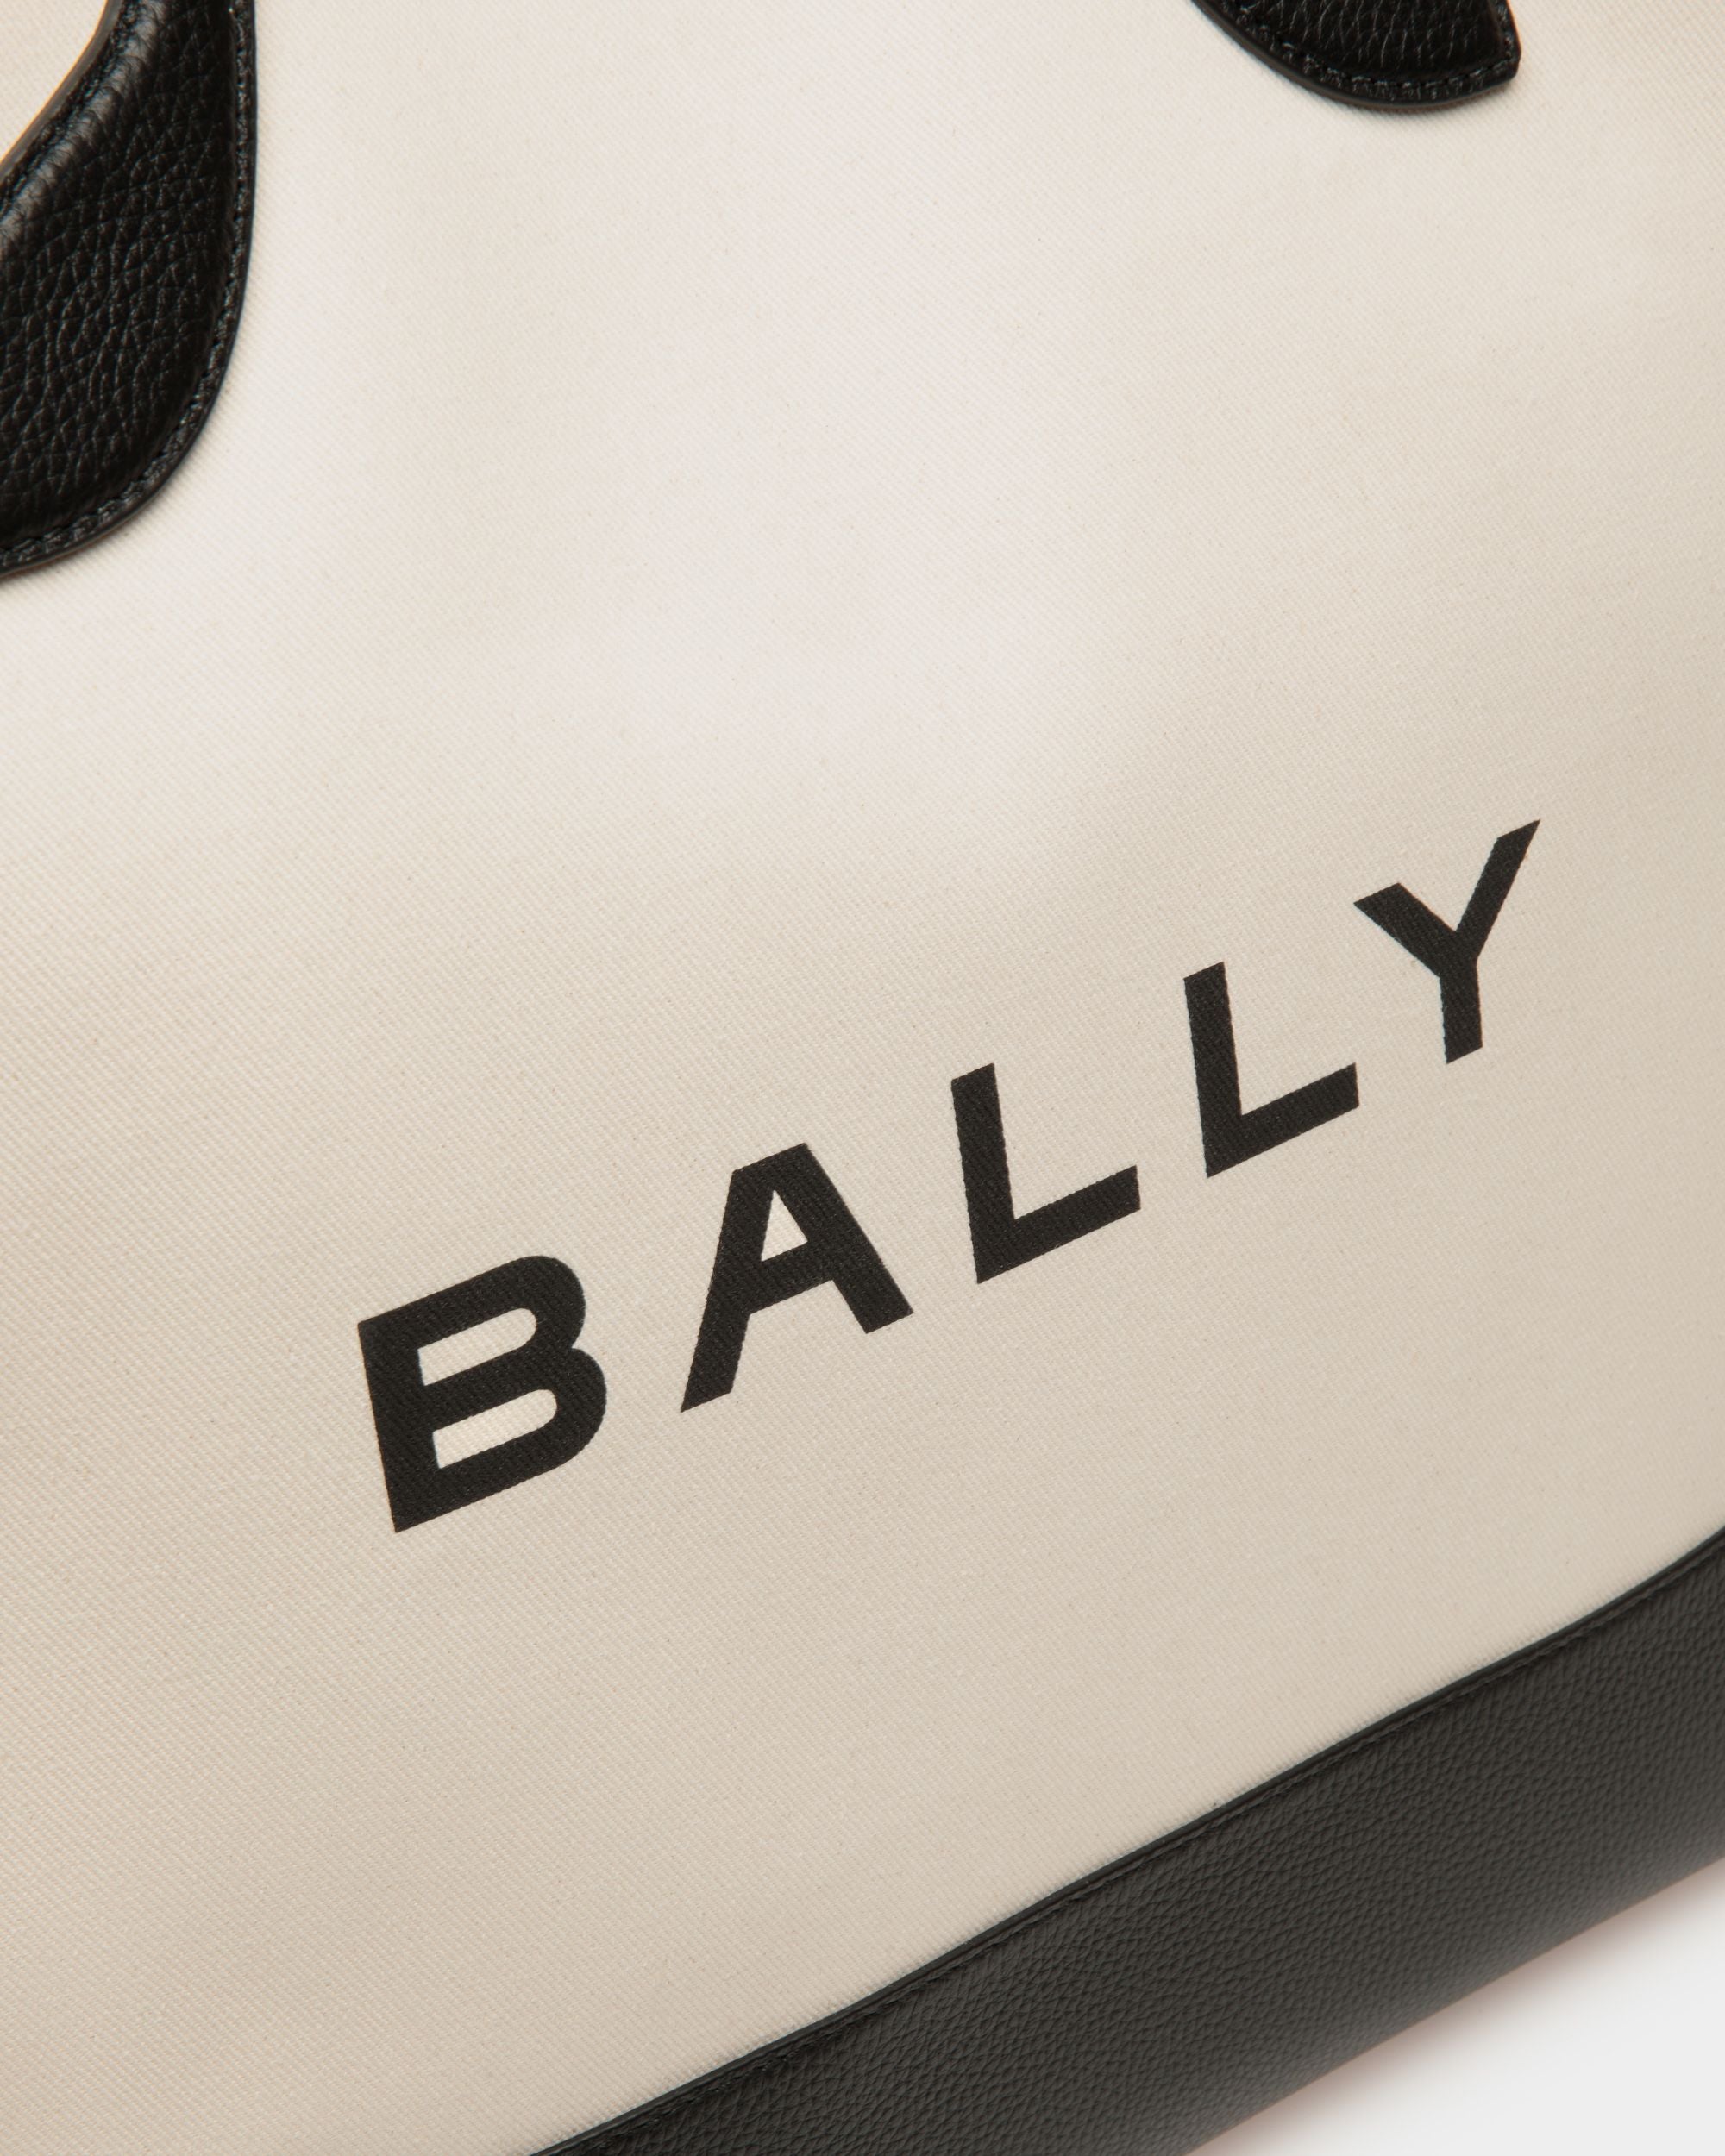 Keep On | Women's Tote Bag | Natural And Black Fabric | Bally | Still Life Detail